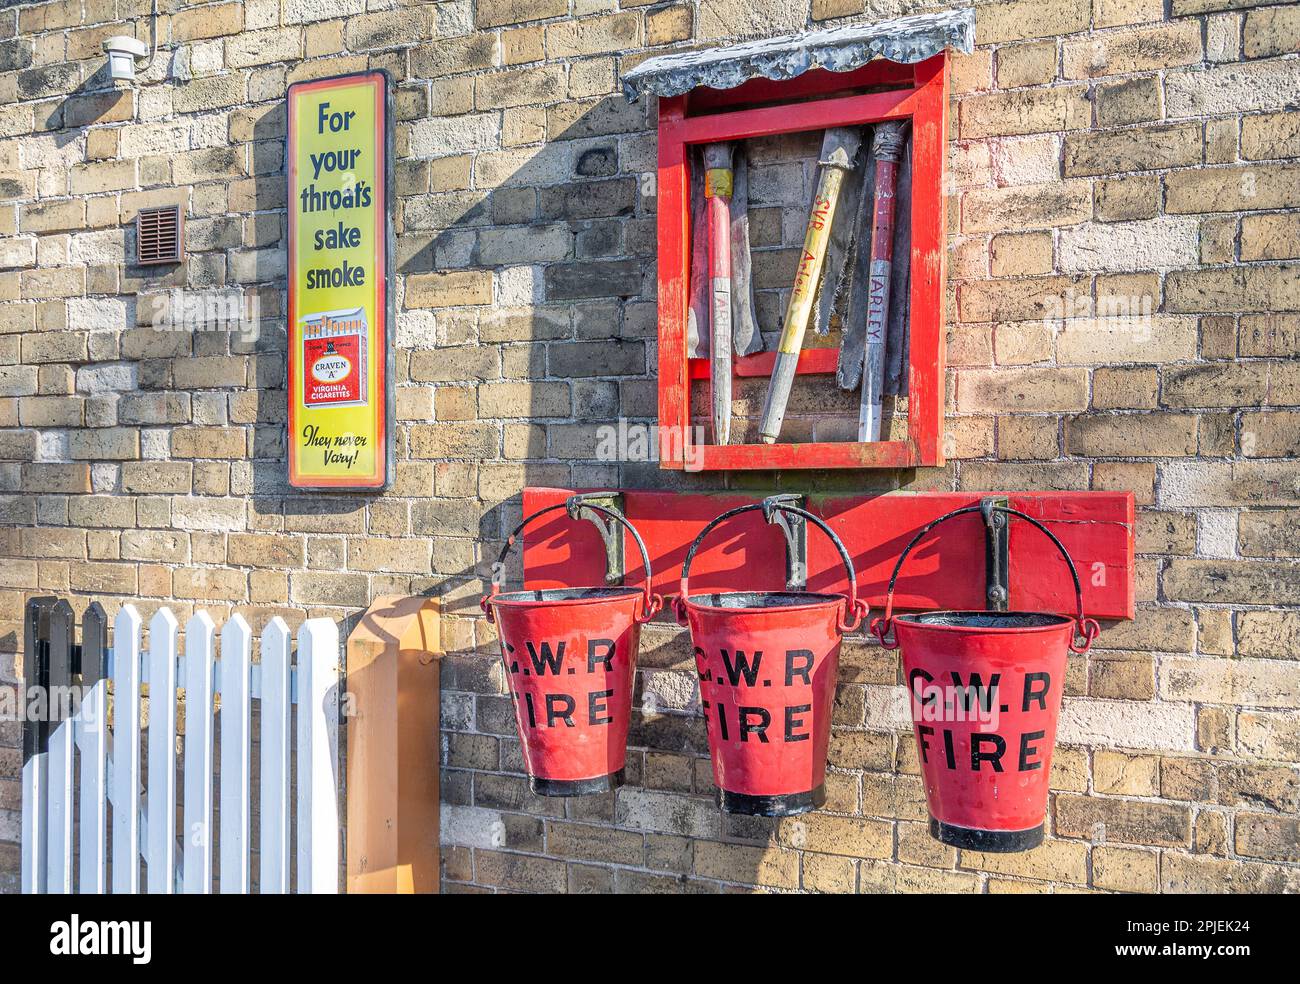 Fire buckets and equipment alongside an old  smoking advert at Arley Station  on the Severn Valley Steam Railway, Worcestershire, England Stock Photo